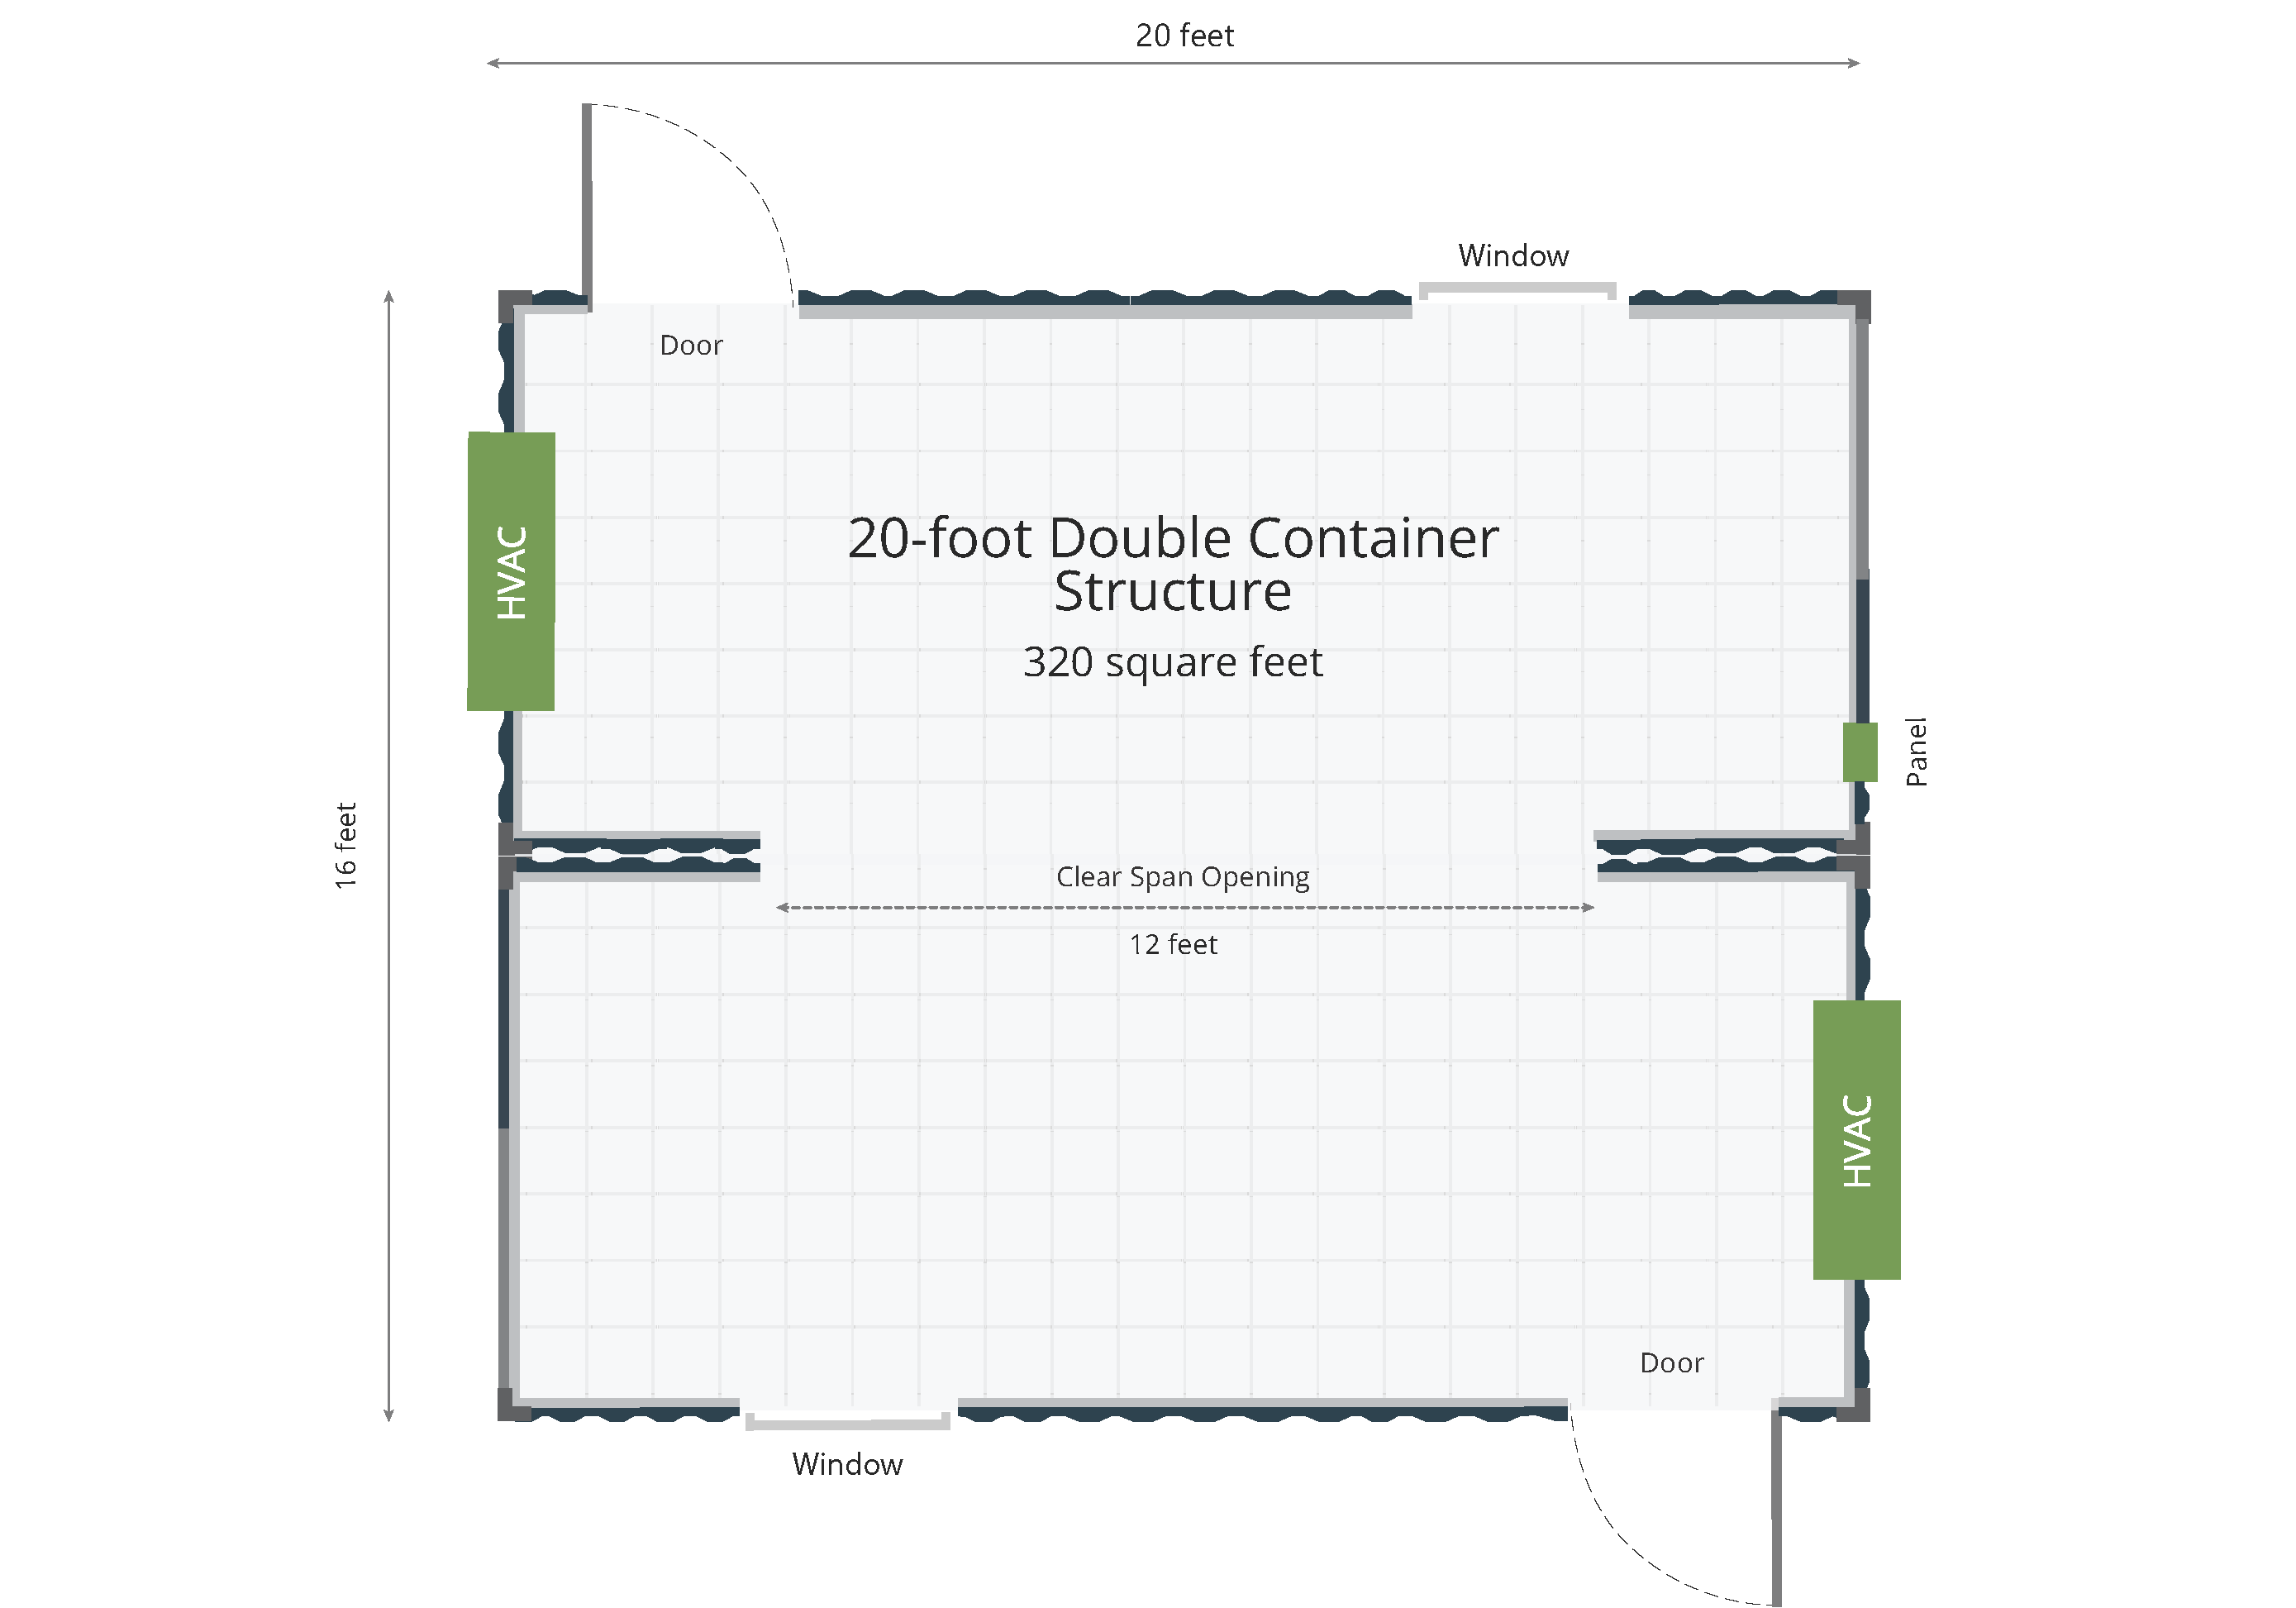 20ft Double Container Structure Floorplan